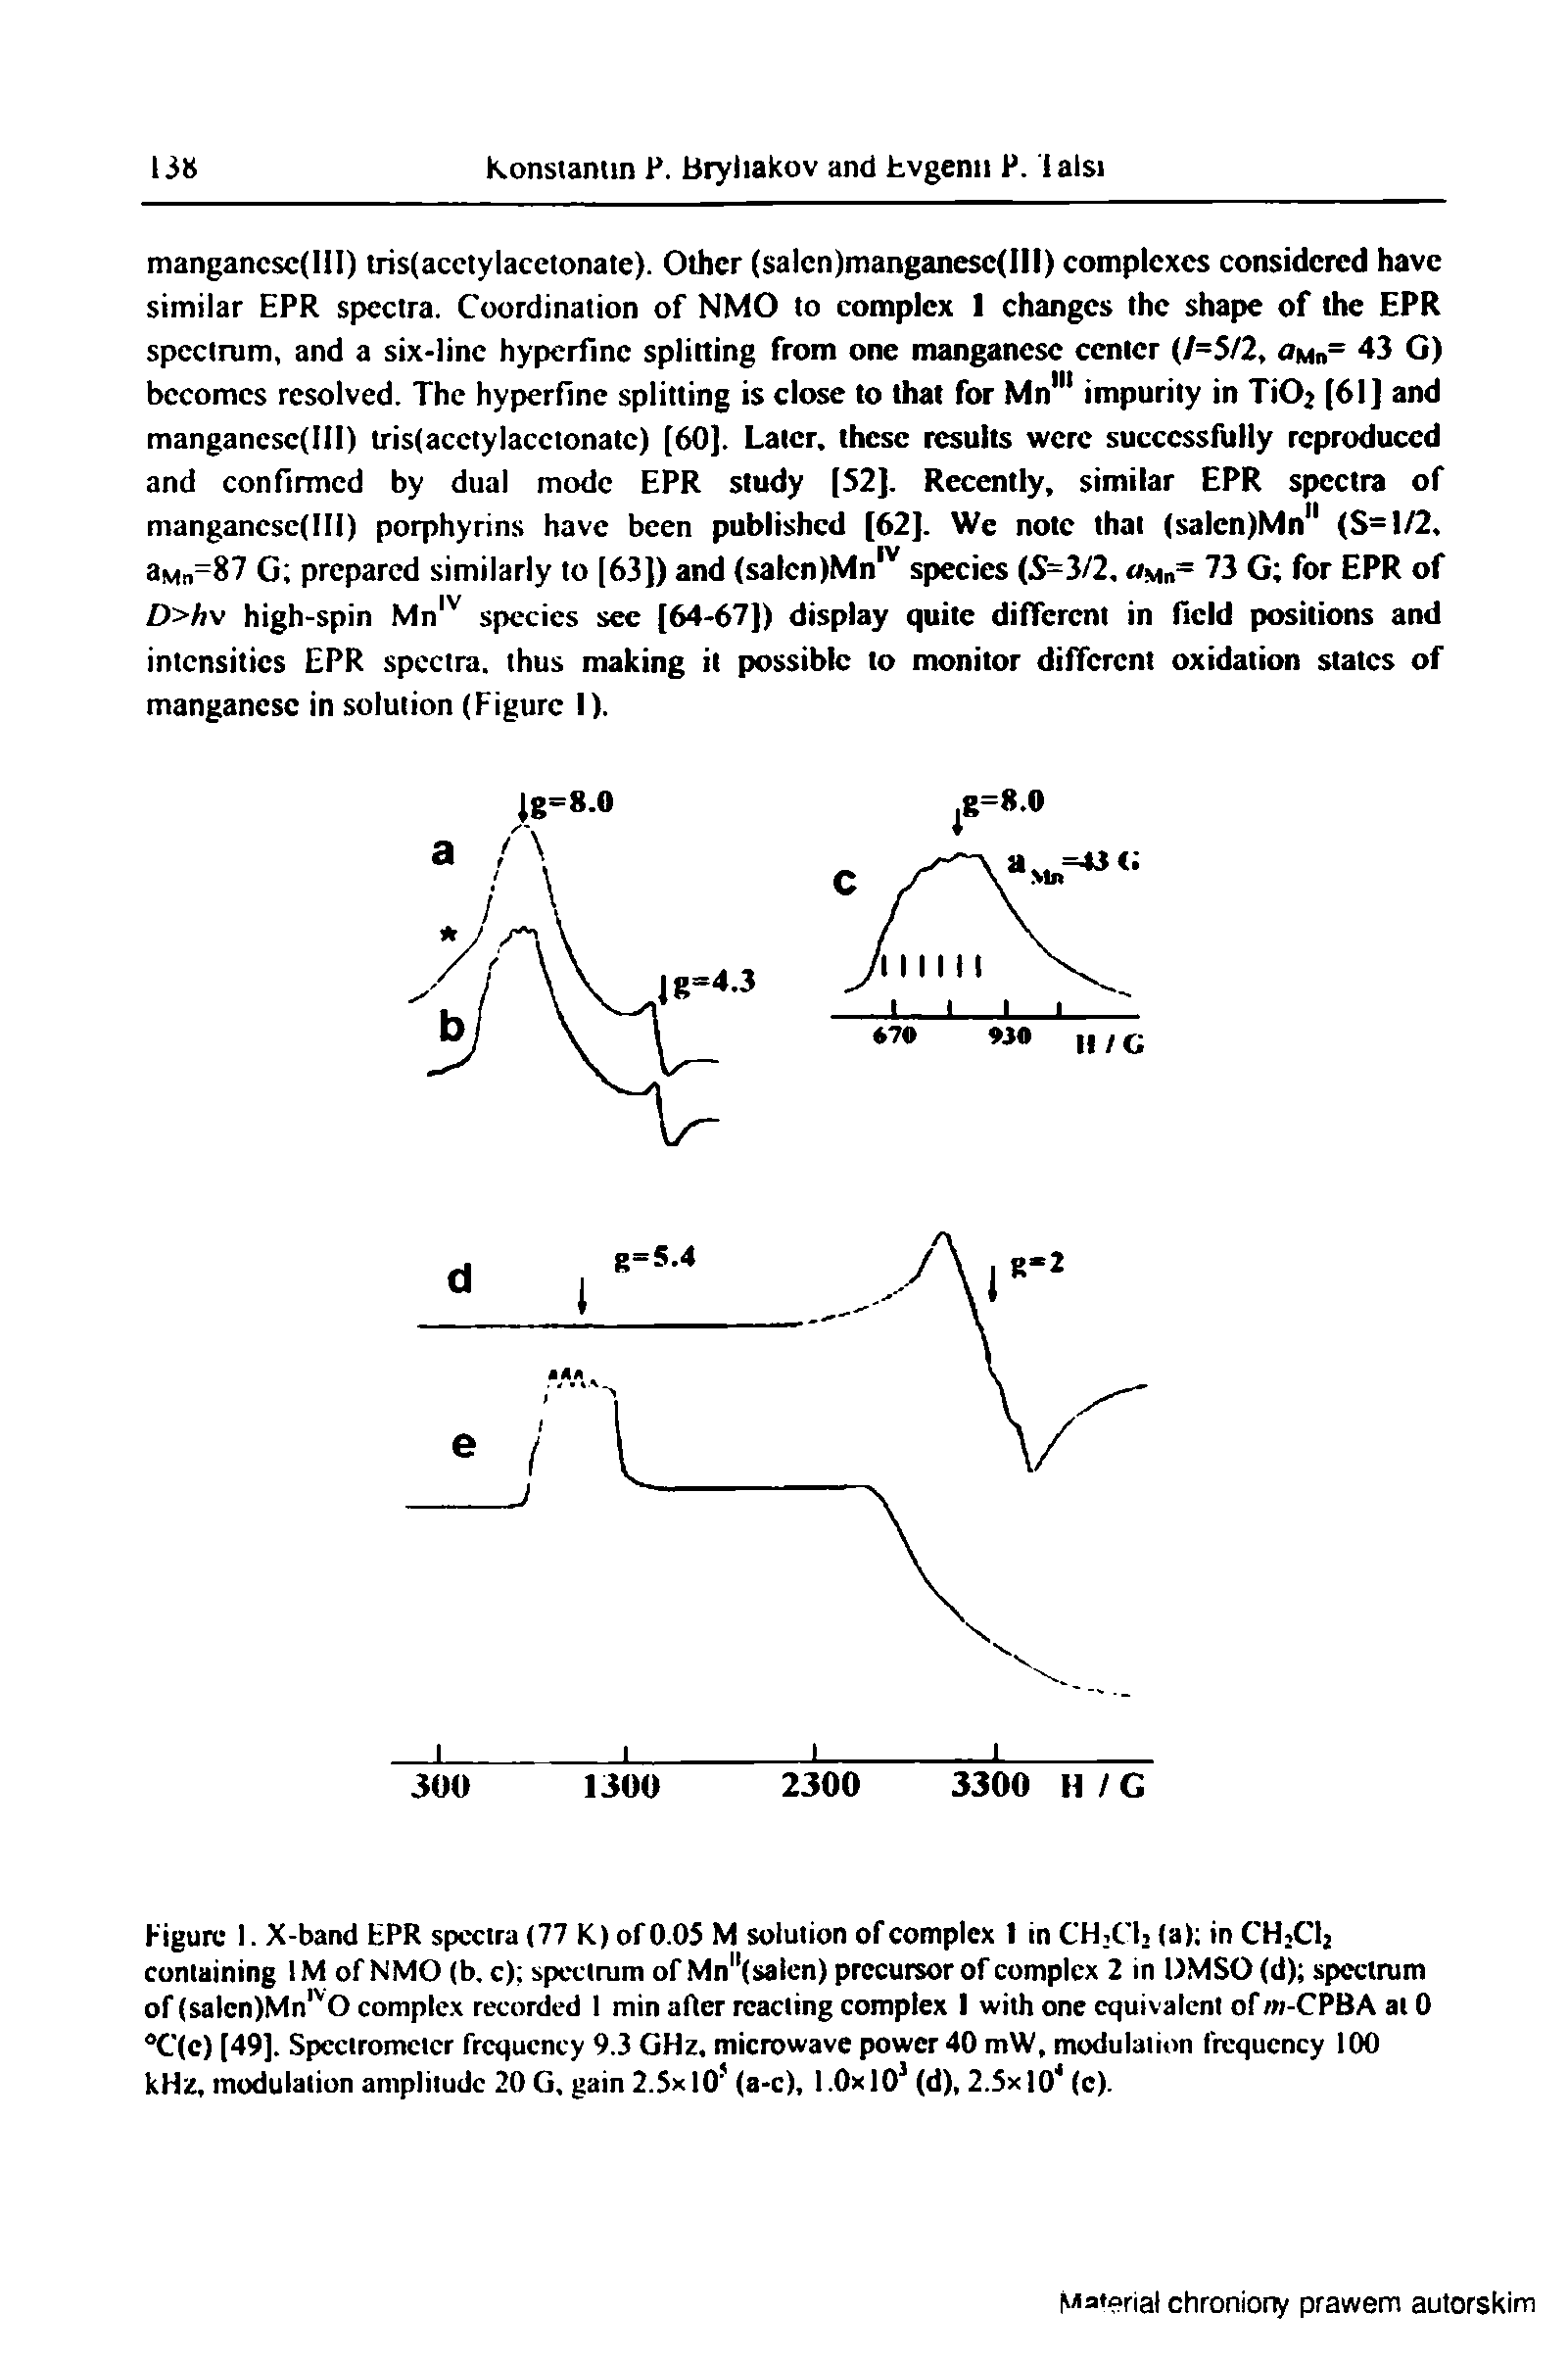 Figure 1. X-band EPR spectra (77 K) of 0.05 M solution of complex 1 in CHiCK (a) in CH2CI2 containing IM of NMO (b, c) spectrum of Mn"(saten) precursor of complex 2 in DMSO (d) spectrum of (salcn)Mn 0 complex recorded 1 min after reading complex I with one equivalent of/w-CPBA at 0 C(c) [49]. Spectrometer frequency 9.3 GHz, microwave power 40 mW, modulation frequency 100 kHz, modulation amplitude 20 G, gain 2.5xl0 (a-c), 1.0x10 (d), 2.5x10 (c).